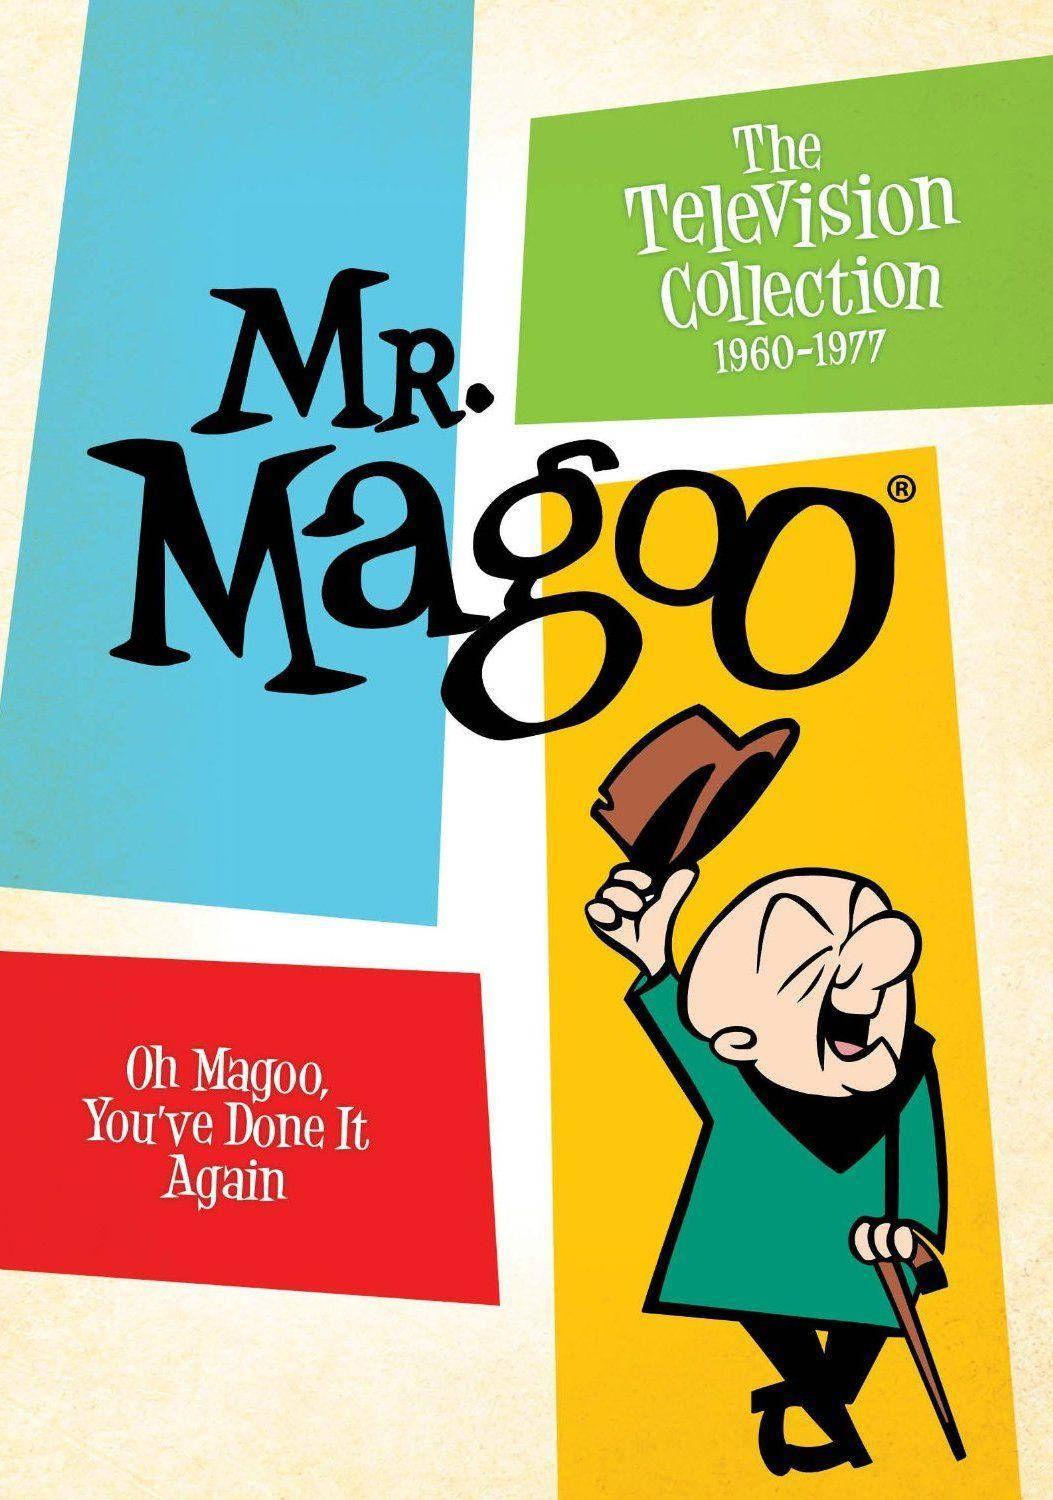 Mr Magoo Television Collection Poster Wallpaper